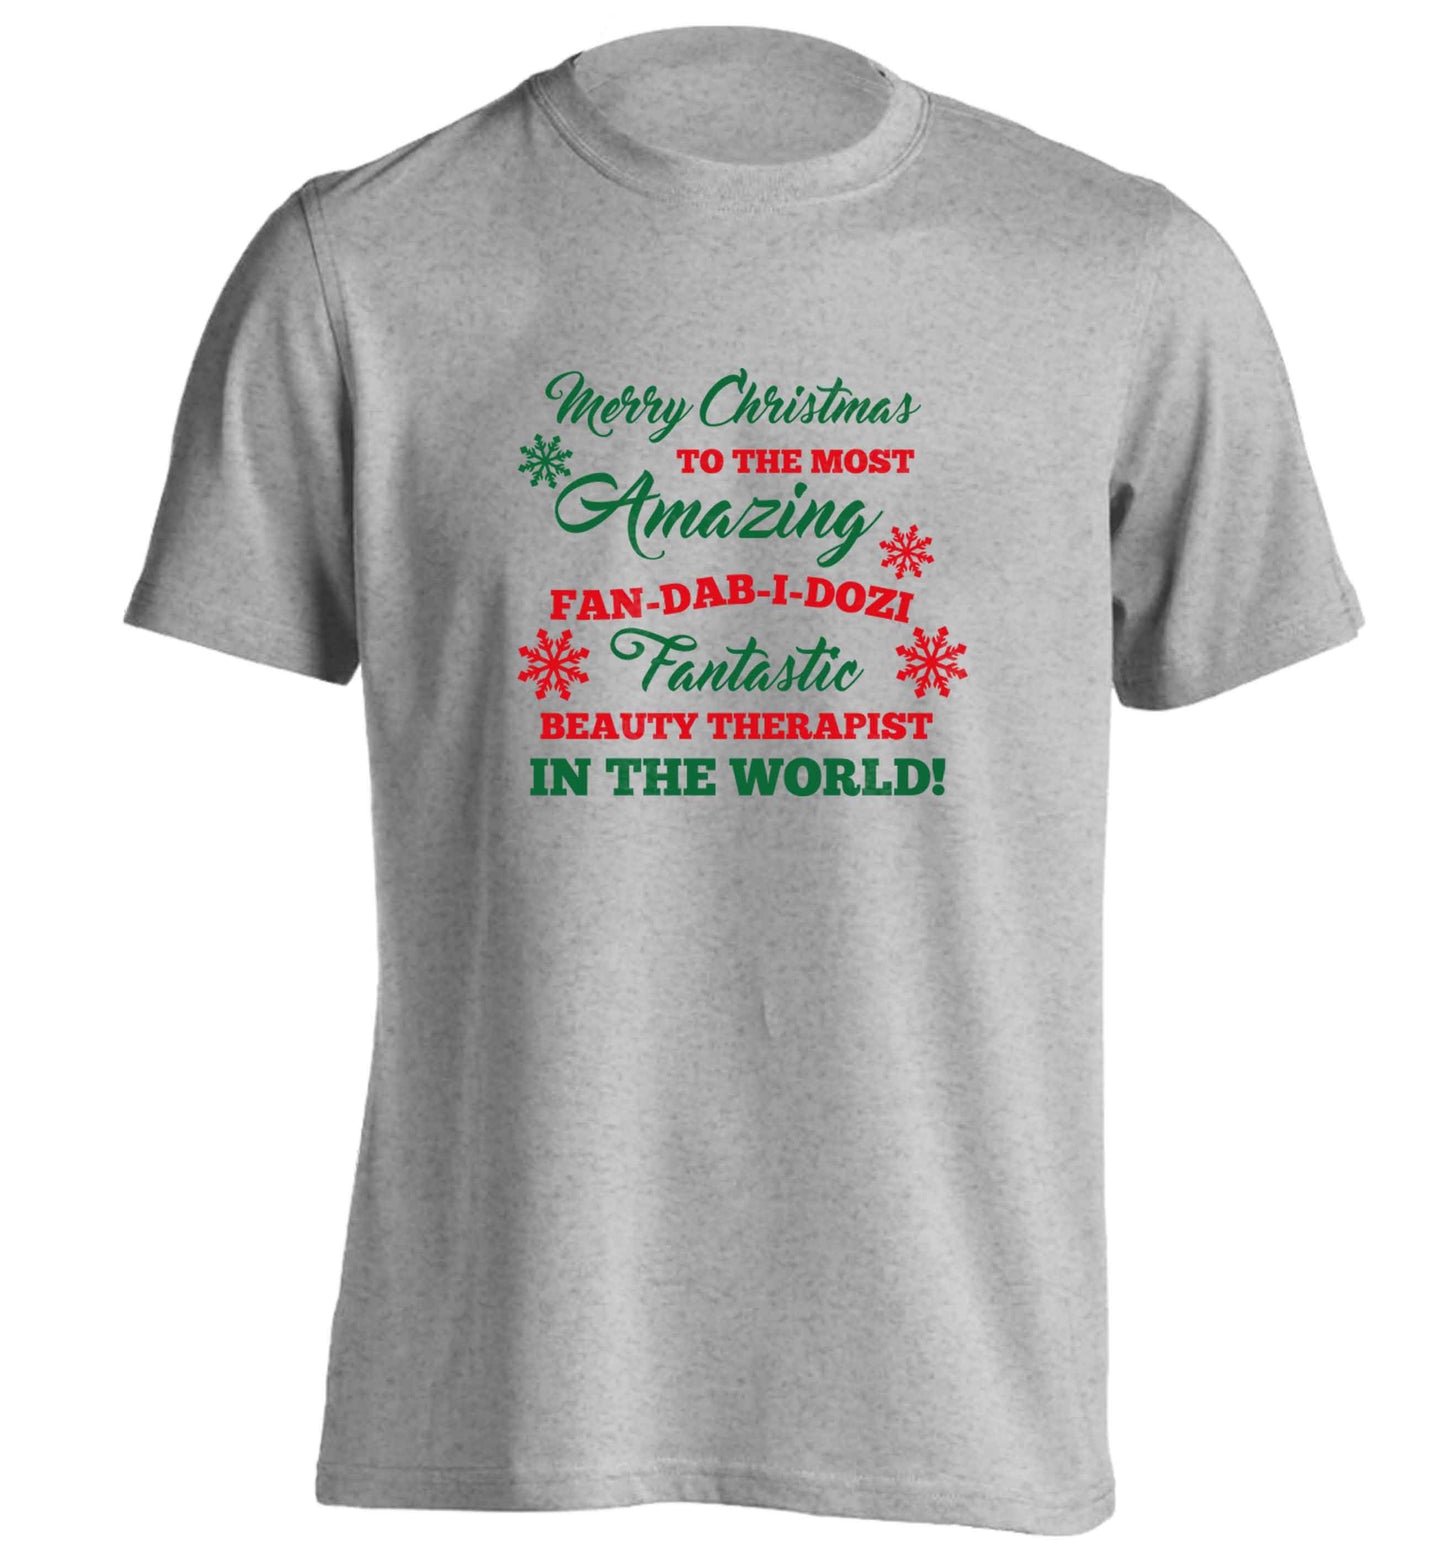 Merry Christmas to the most amazing fan-dab-i-dozi fantasic beauty therapist in the world adults unisex grey Tshirt 2XL